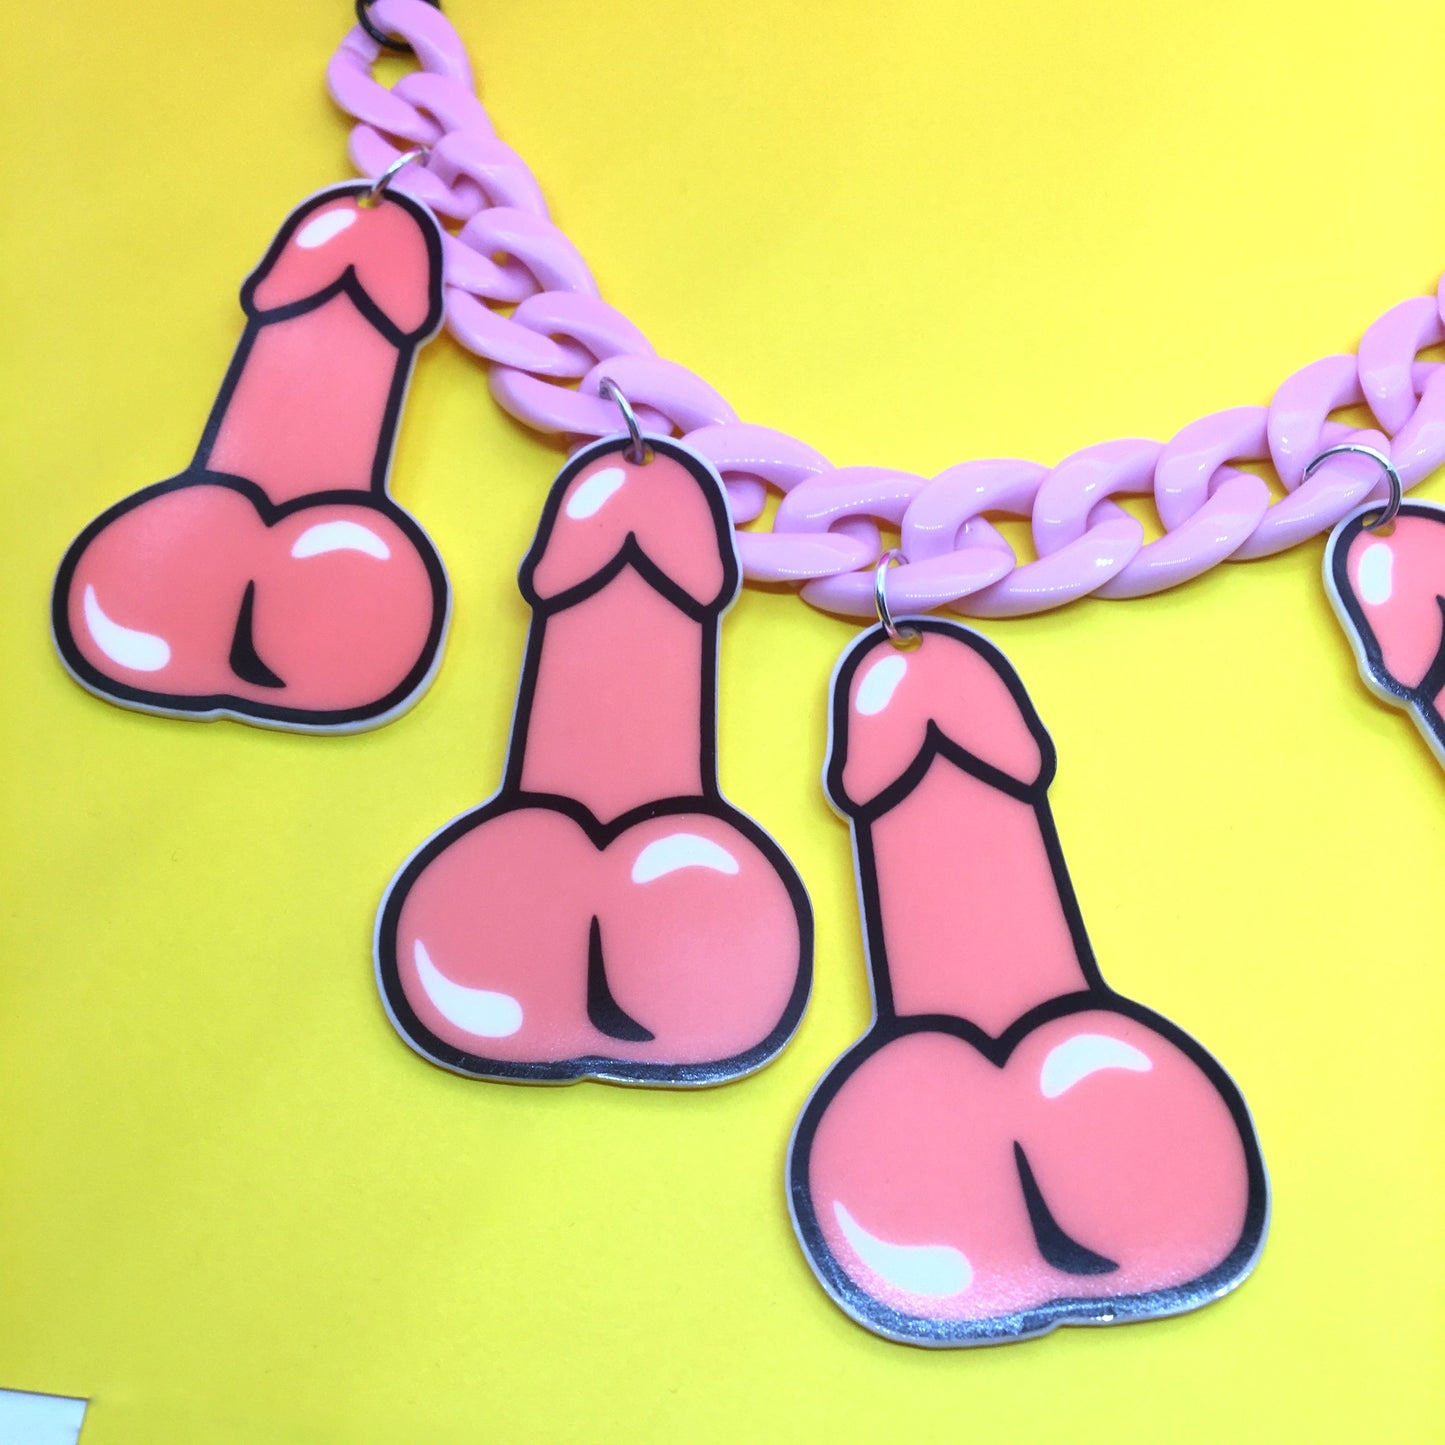 Penis Necklace and Earrings